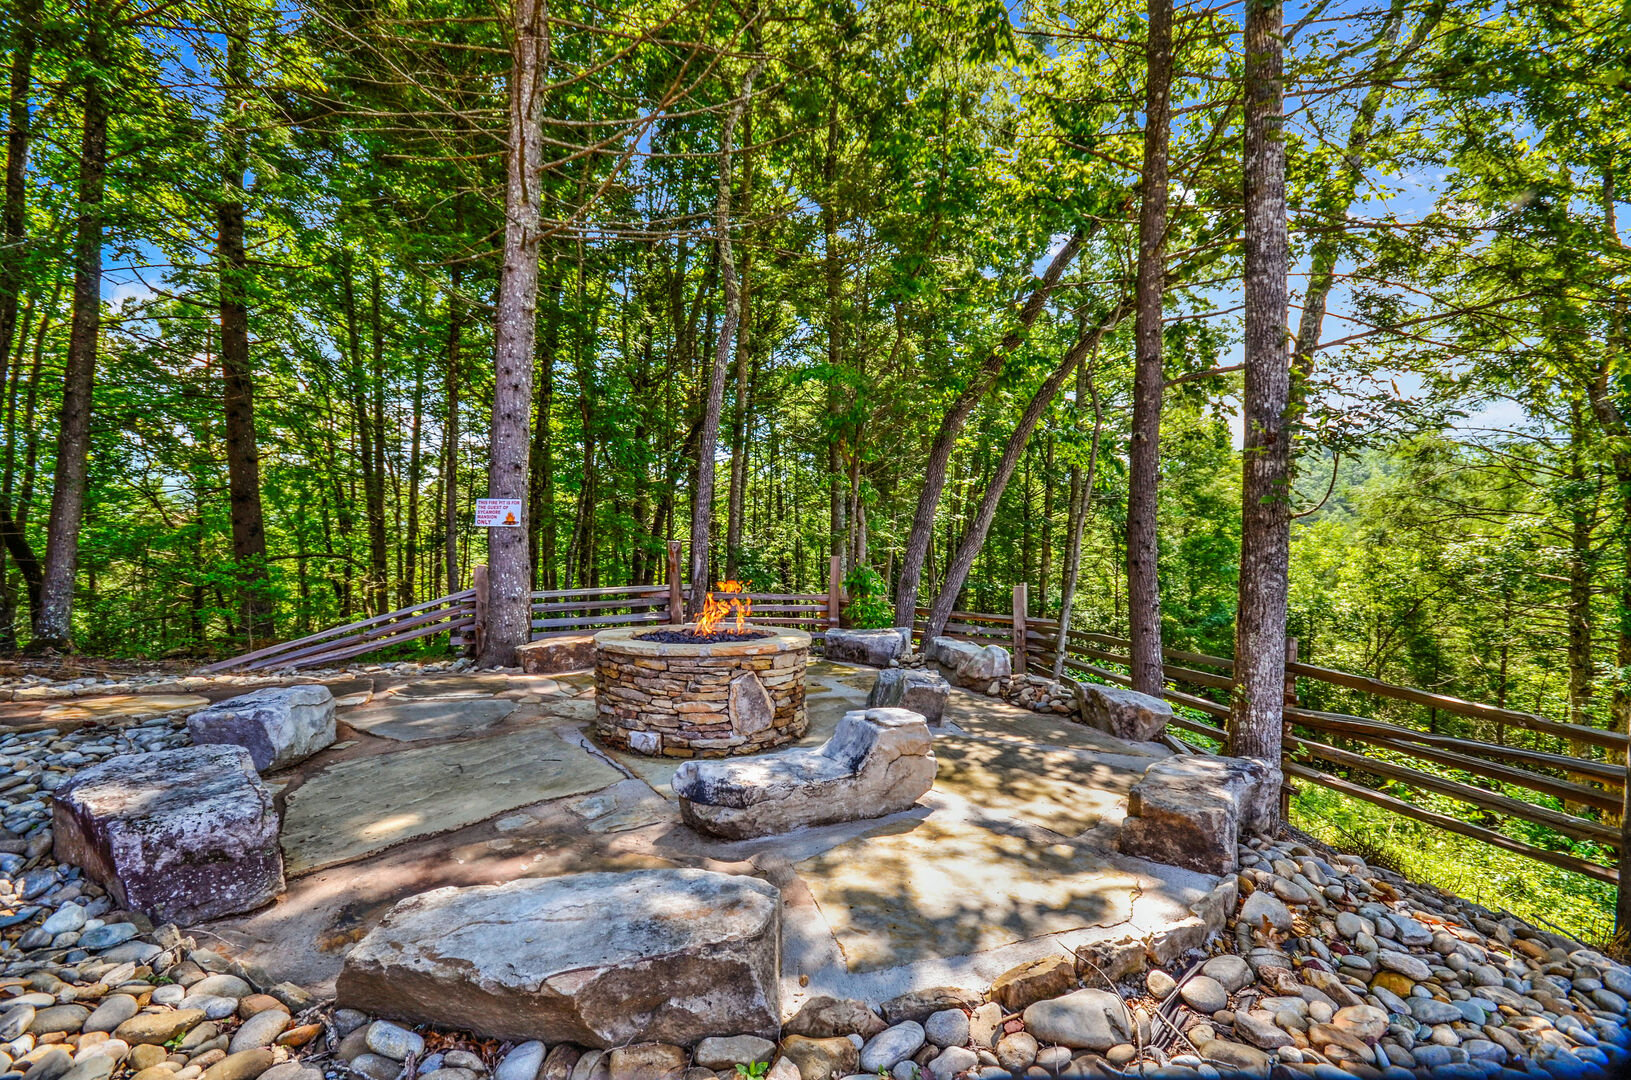 Gathering Area with Fire Pit, Rock Garden Benches, and Trees.